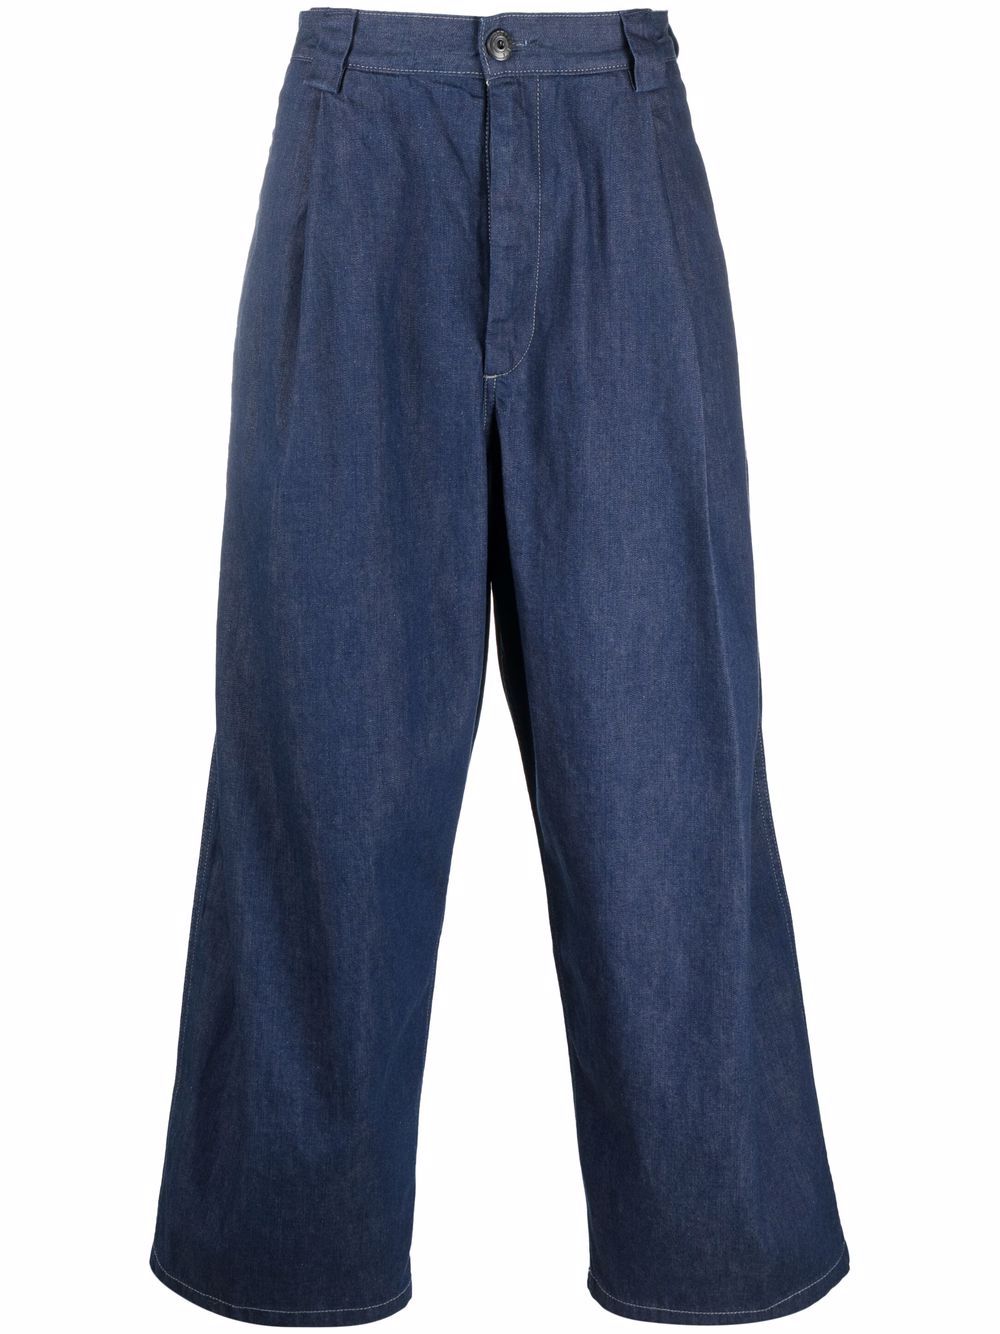 Levi's: Made & Crafted Denim Family wide-leg jeans - Blue von Levi's: Made & Crafted